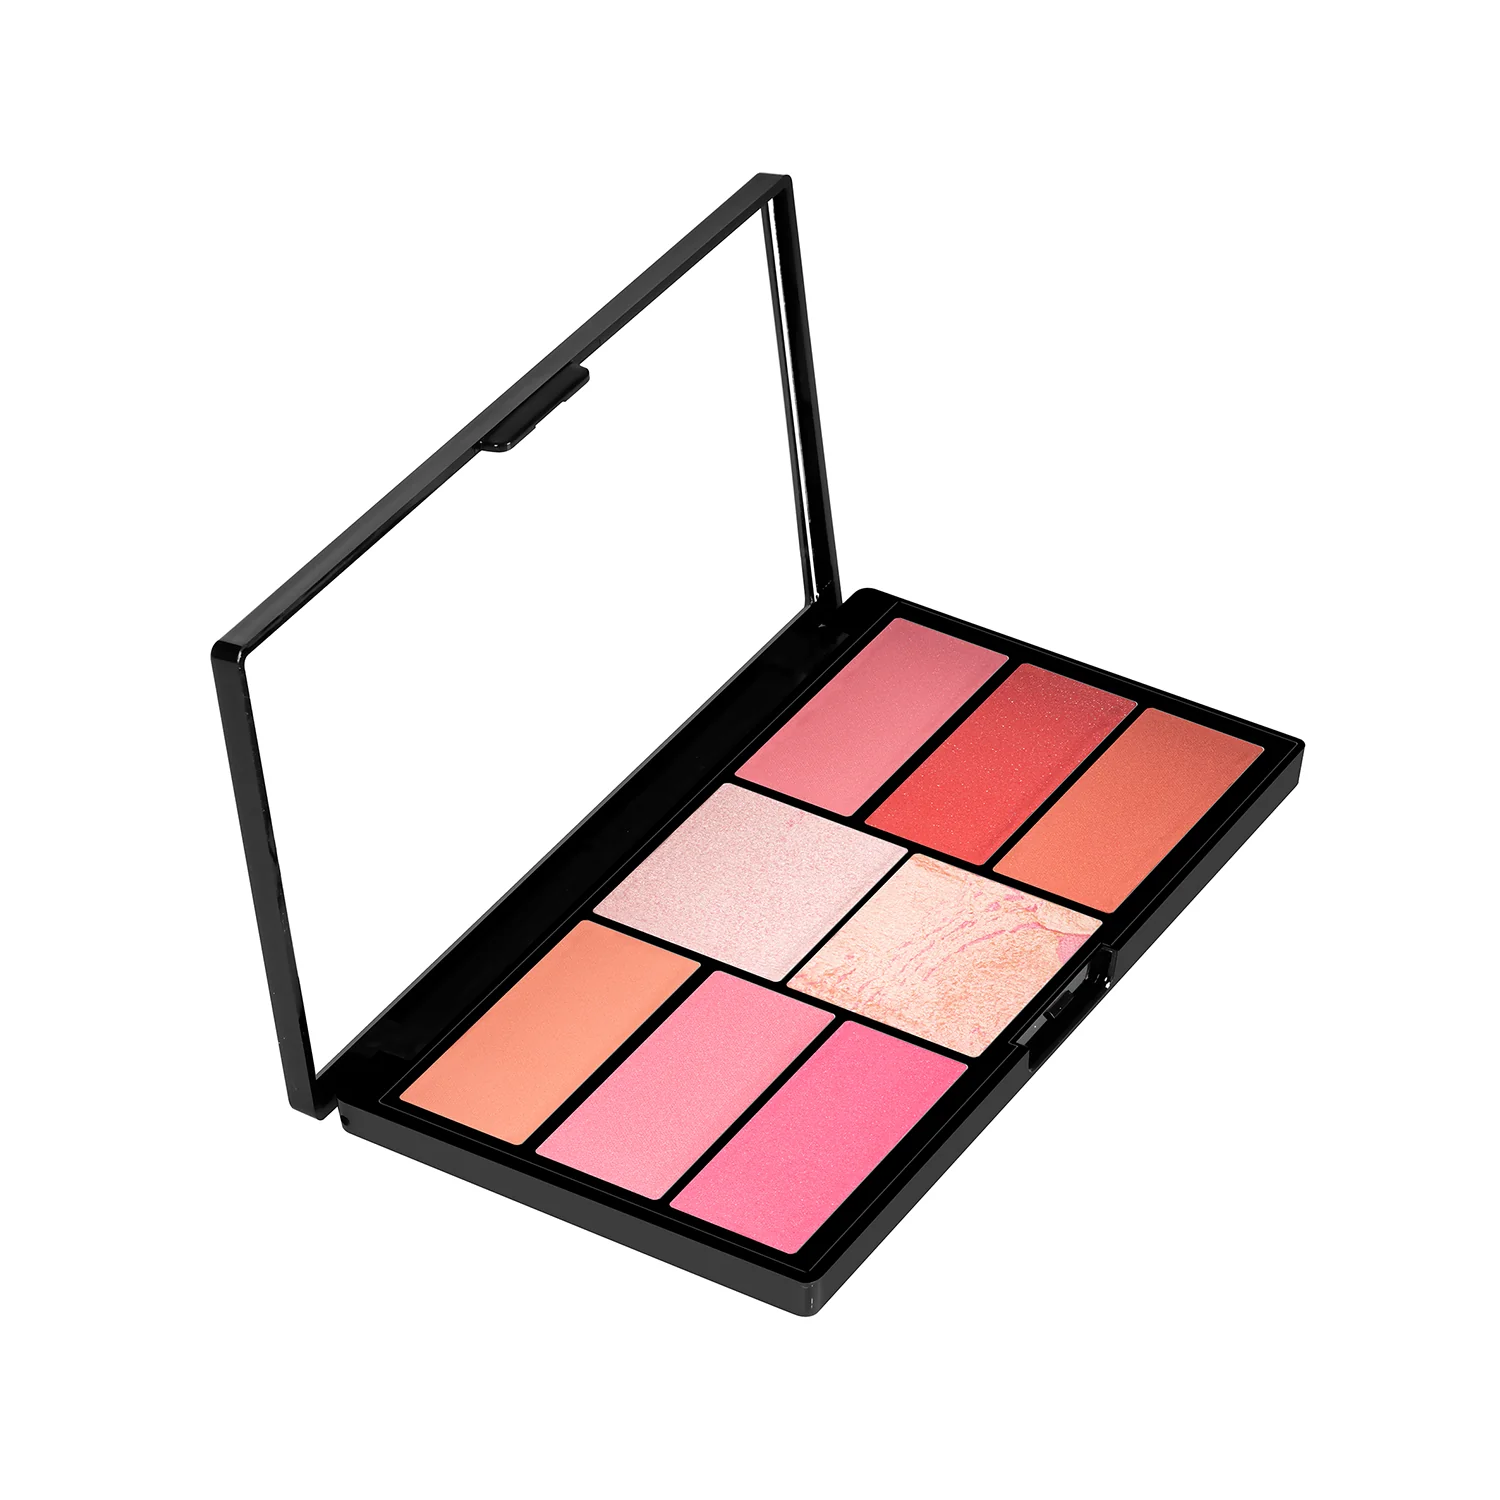 Swiss beauty pro blush and highlighter palette